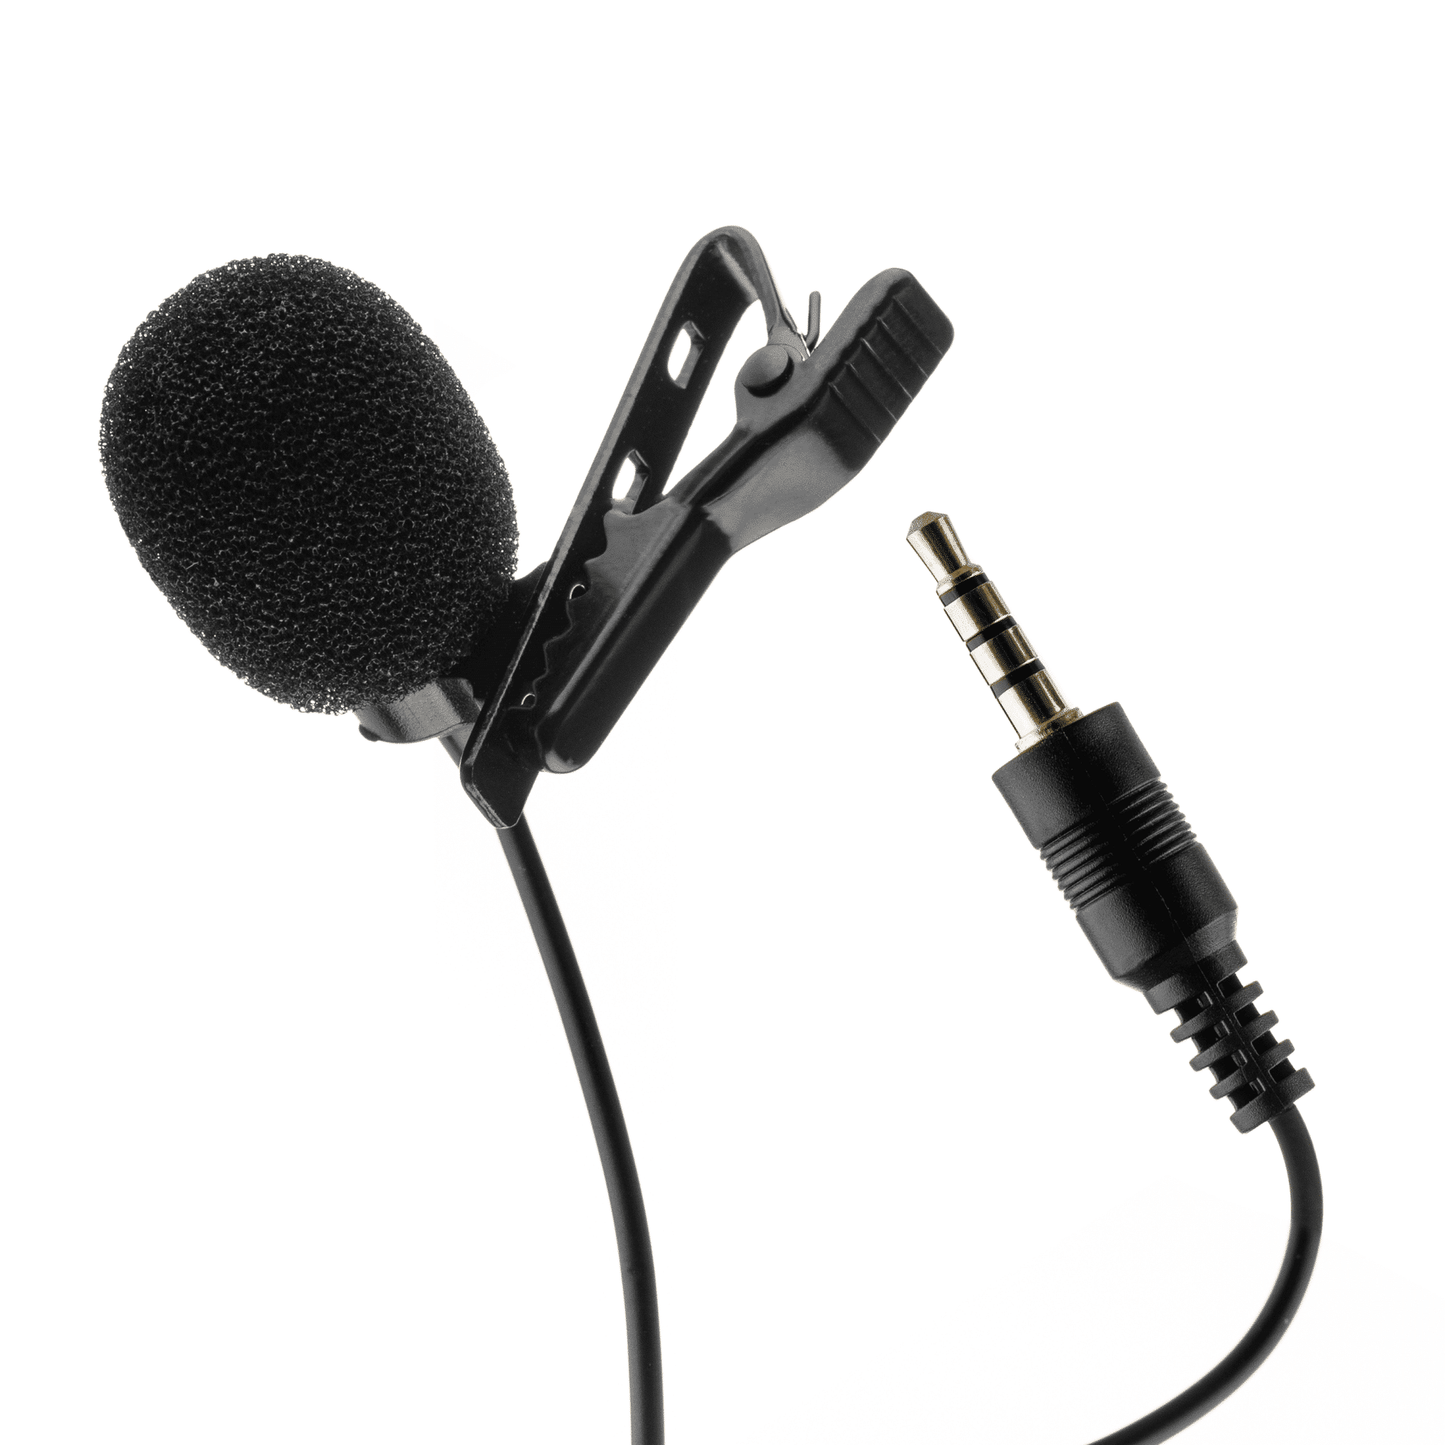 Lavalier microphone for iPhone and Android smartphones